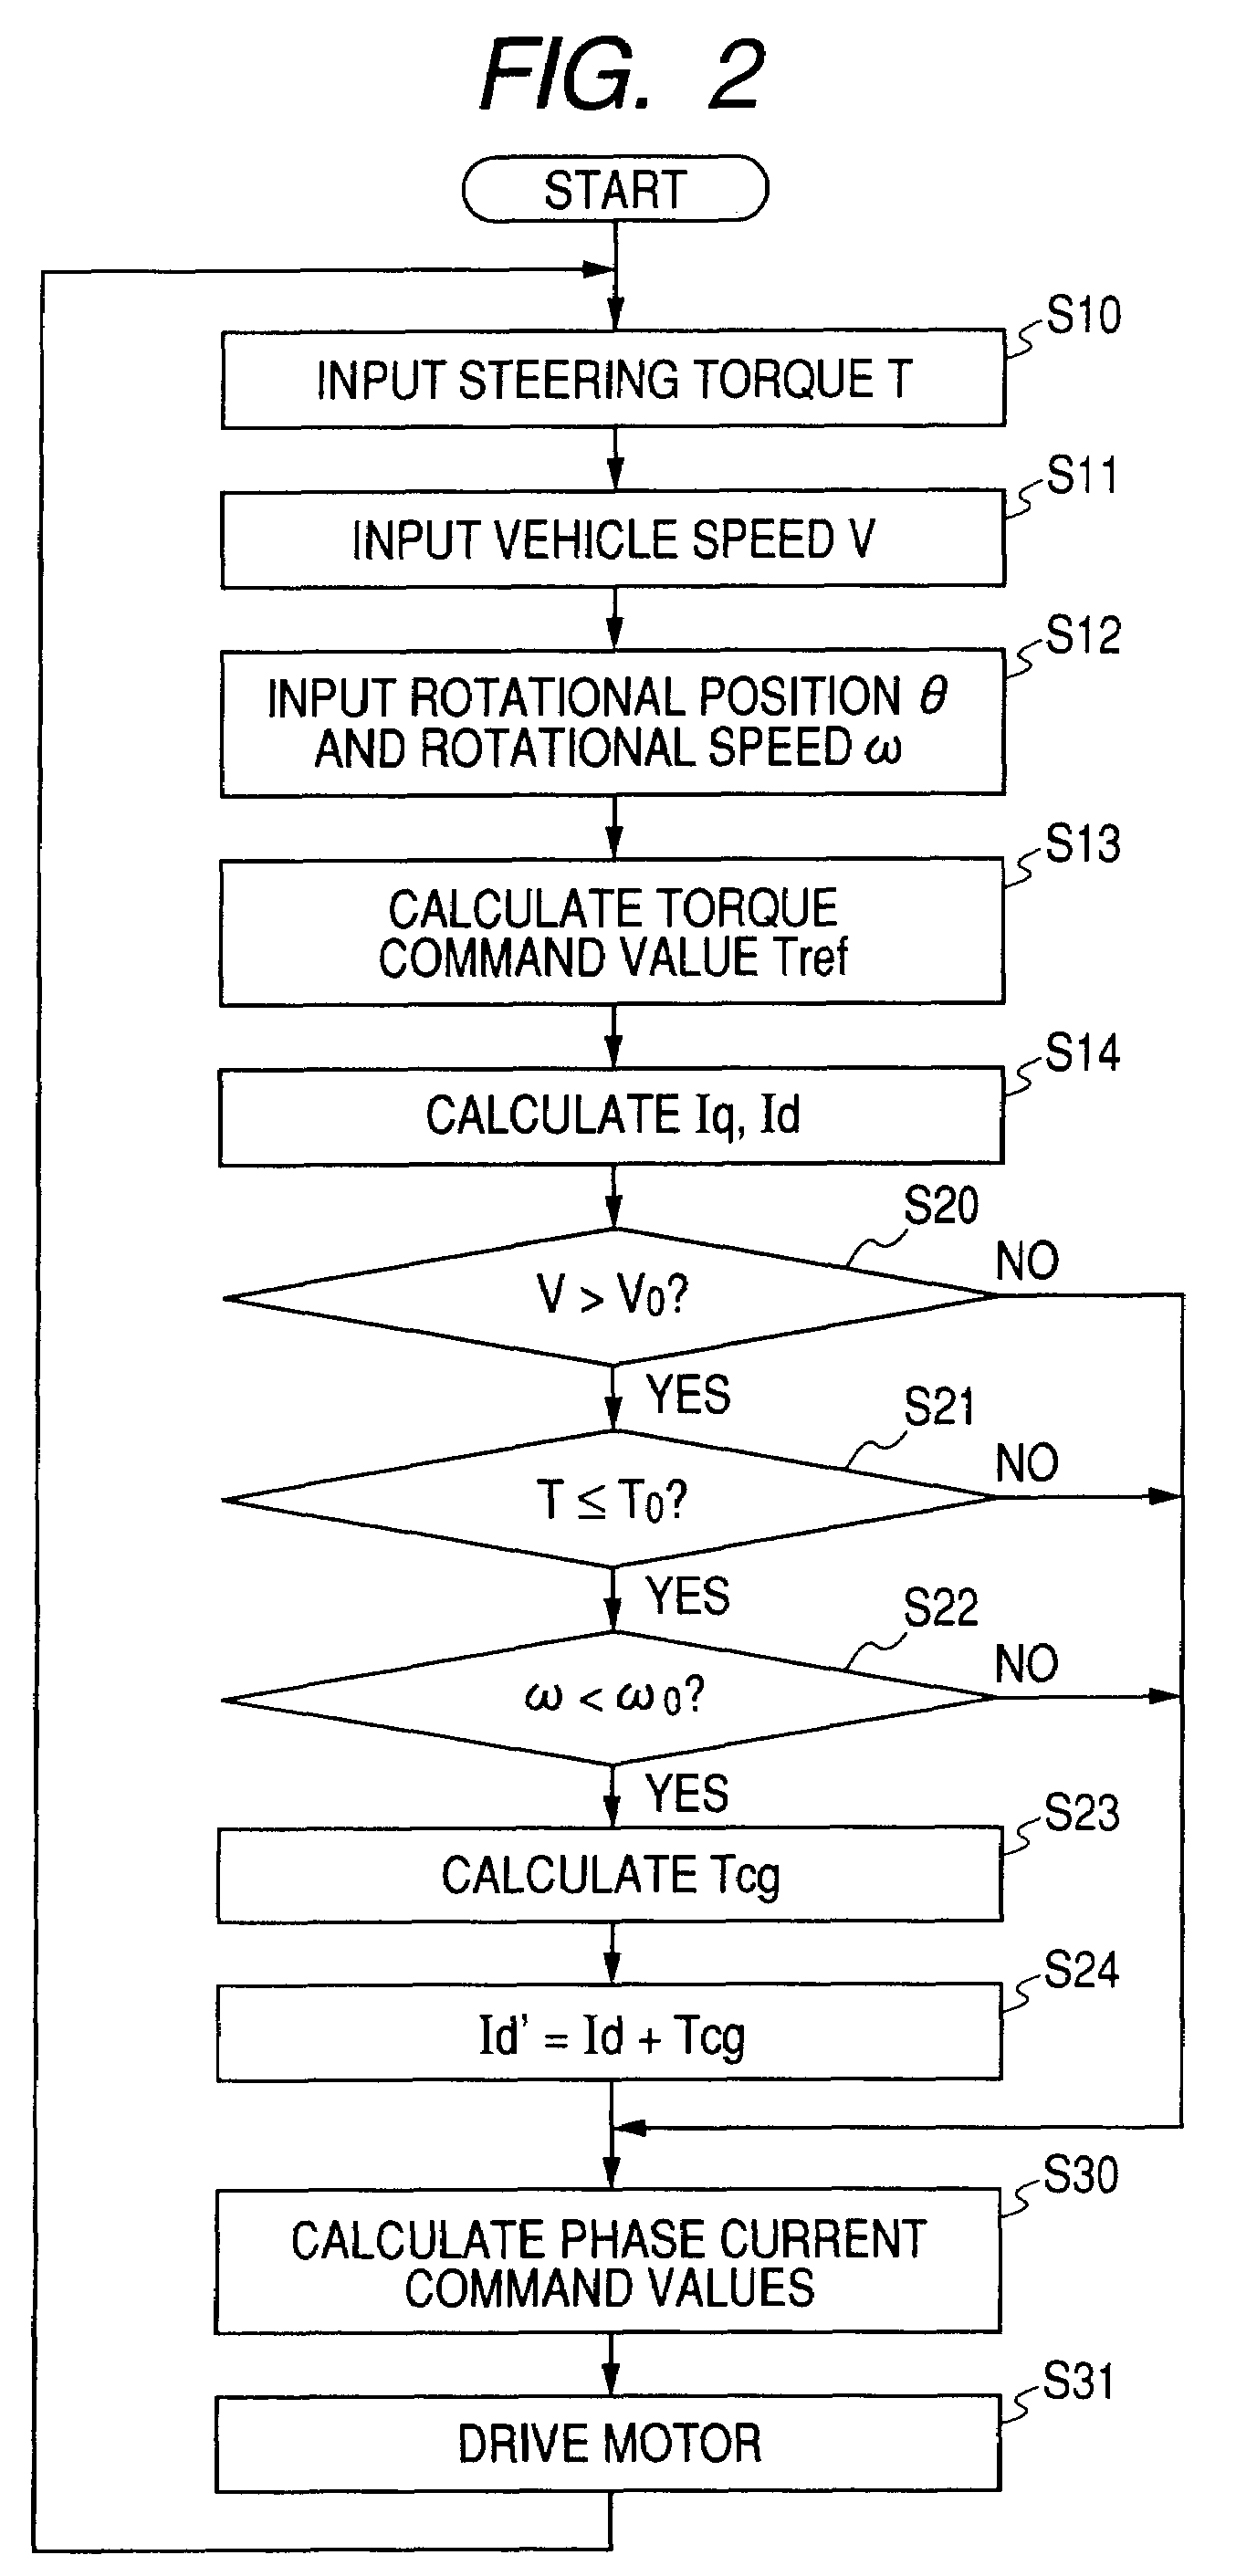 Electric power steering apparatus and controller therefor